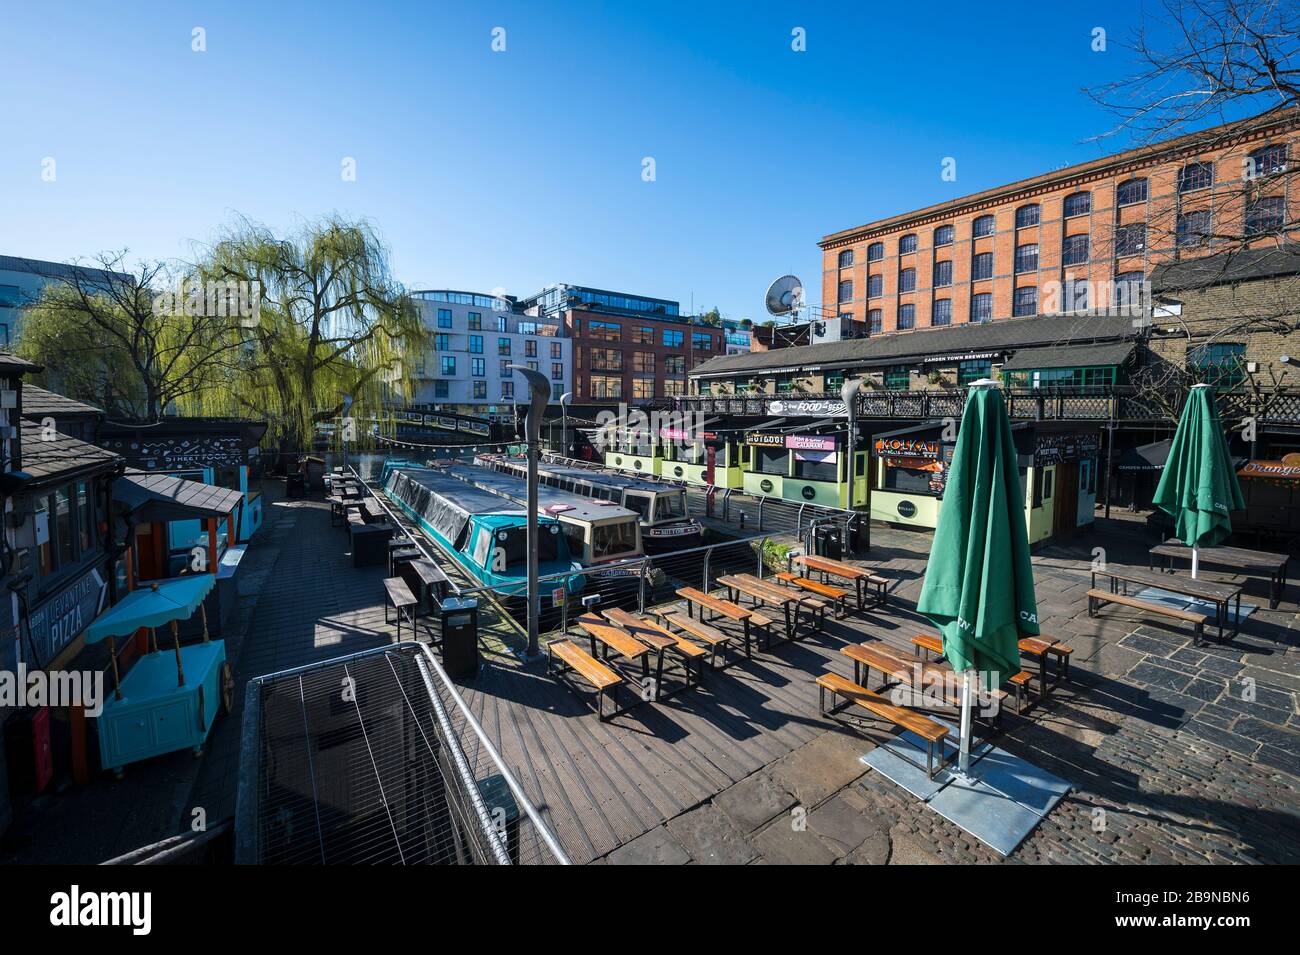 LONDON - 23 MARCH, 2020: The normally bustling Camden Lock and Market are eerily quiet as the city prepares to enter lockdown due to the Coronavirus. Stock Photo